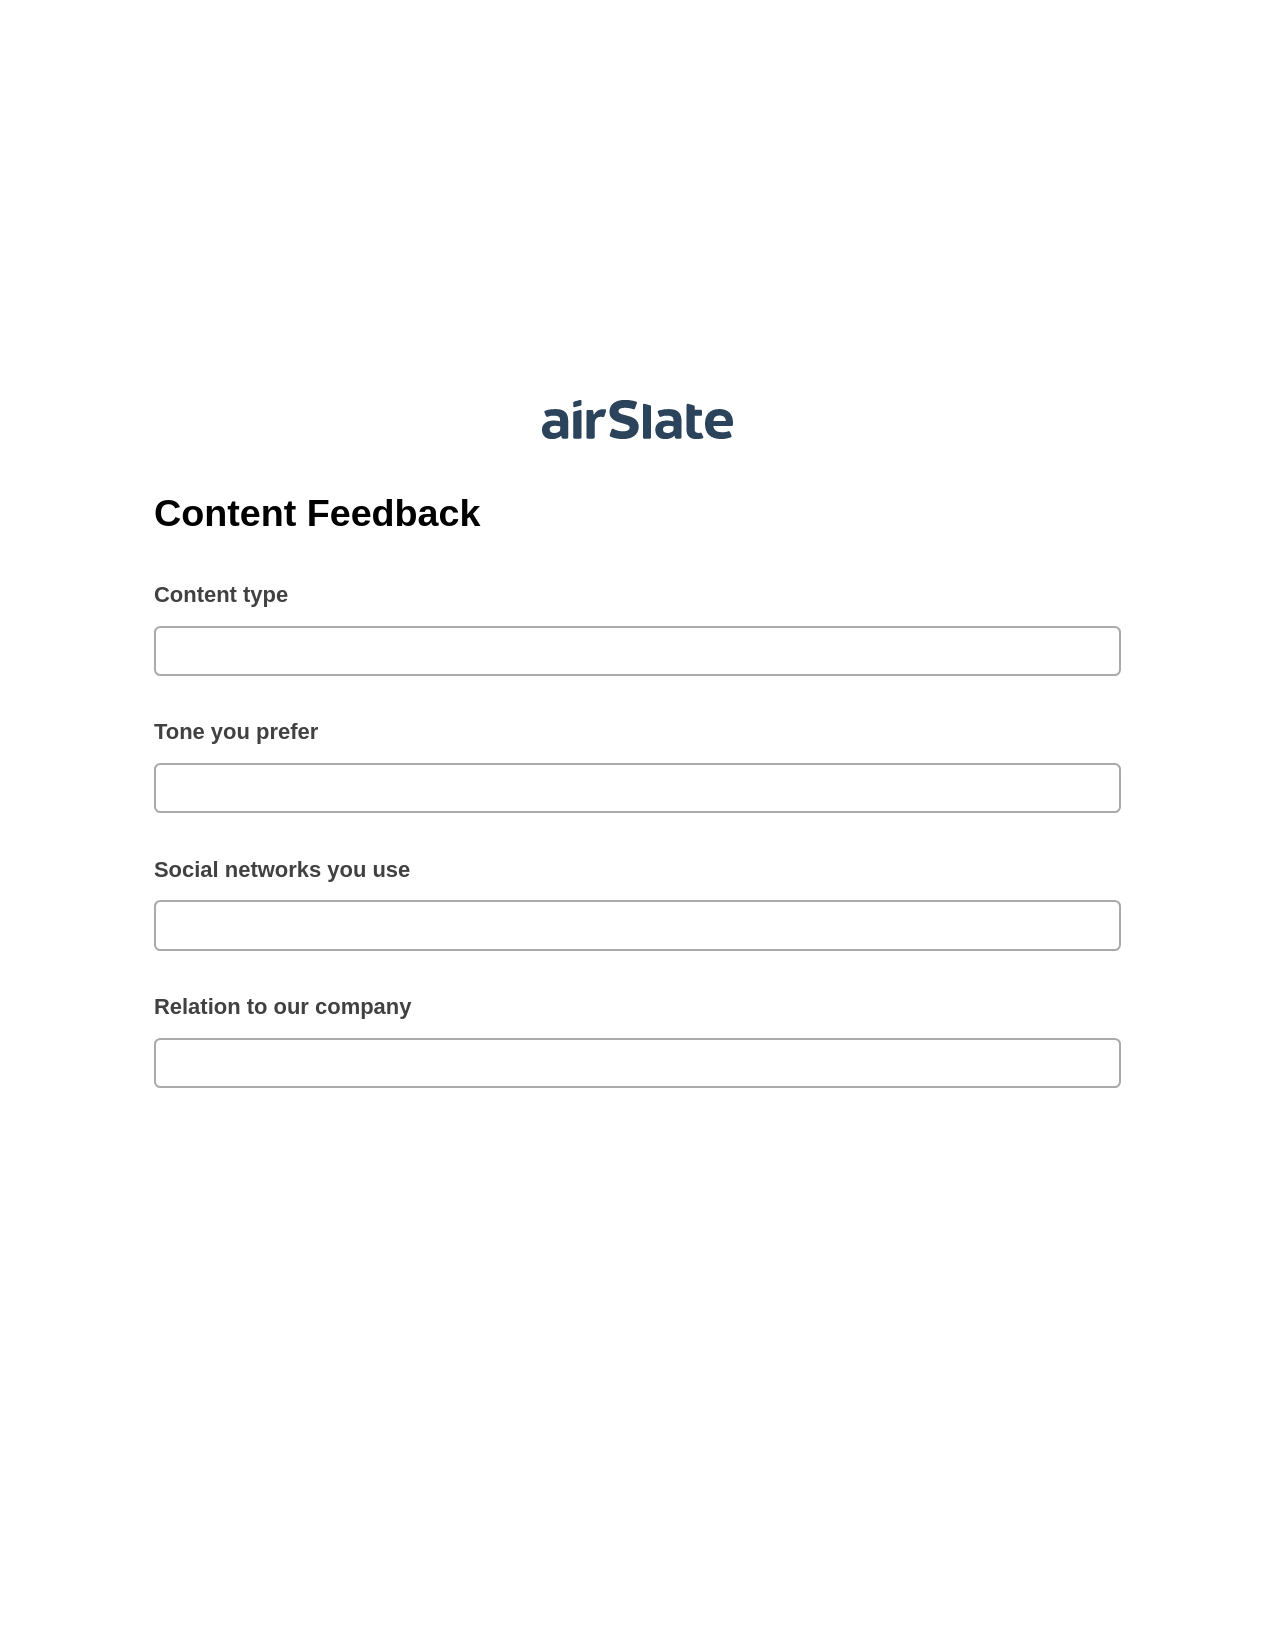 Multirole Content Feedback Pre-fill Slate from MS Dynamics 365 Records Bot, Create NetSuite Records Bot, Google Drive Bot